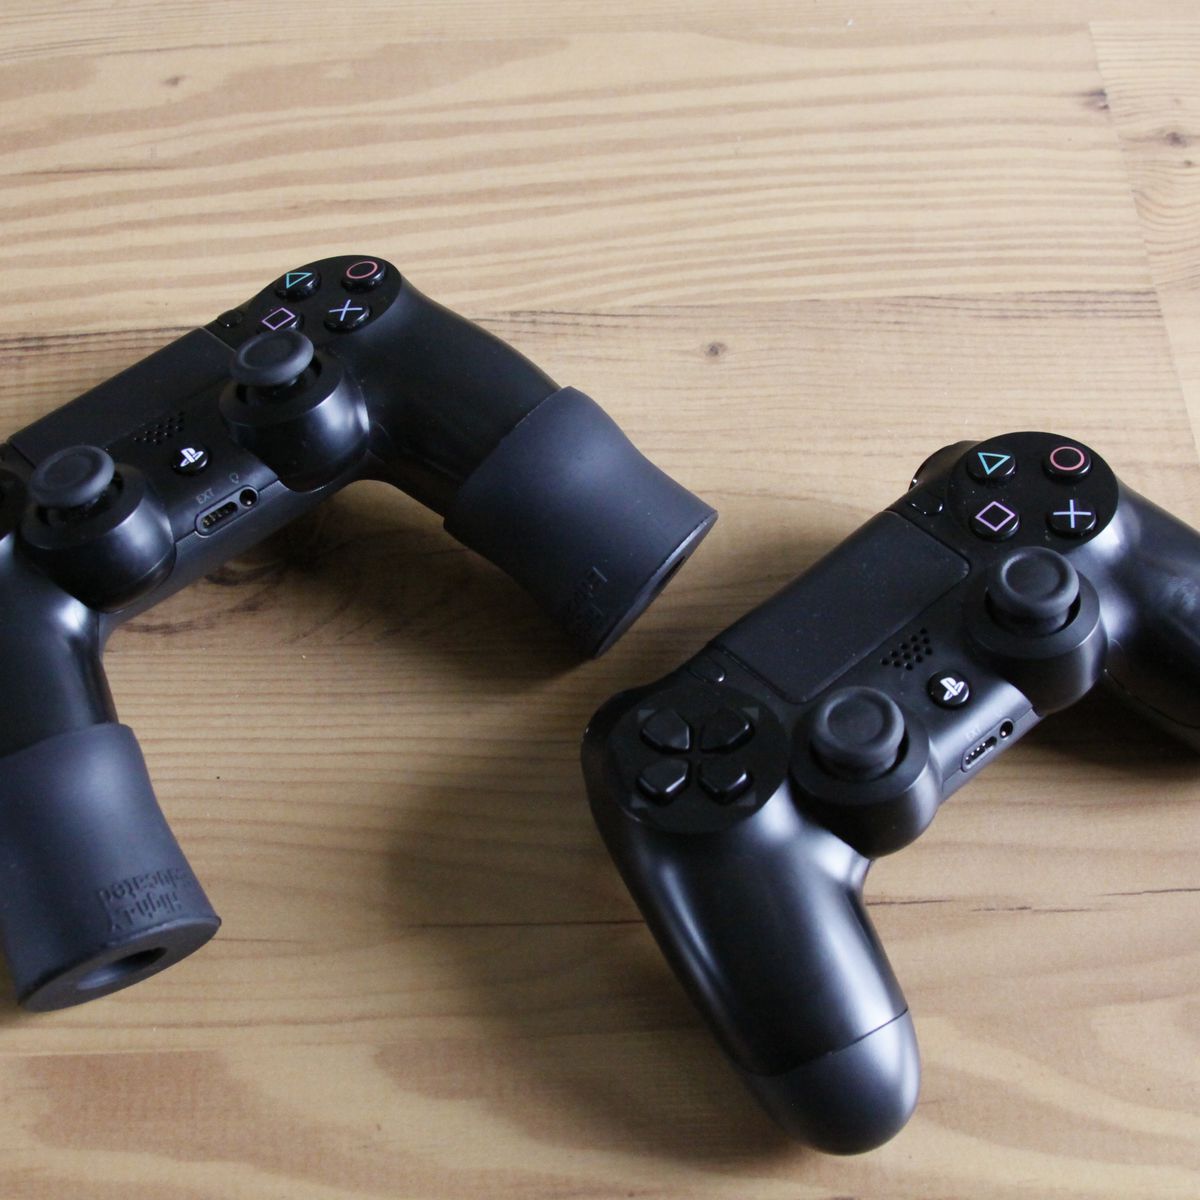 A DualShuck4 controller with Playbudz grip extenders next to a standard controller for comparison